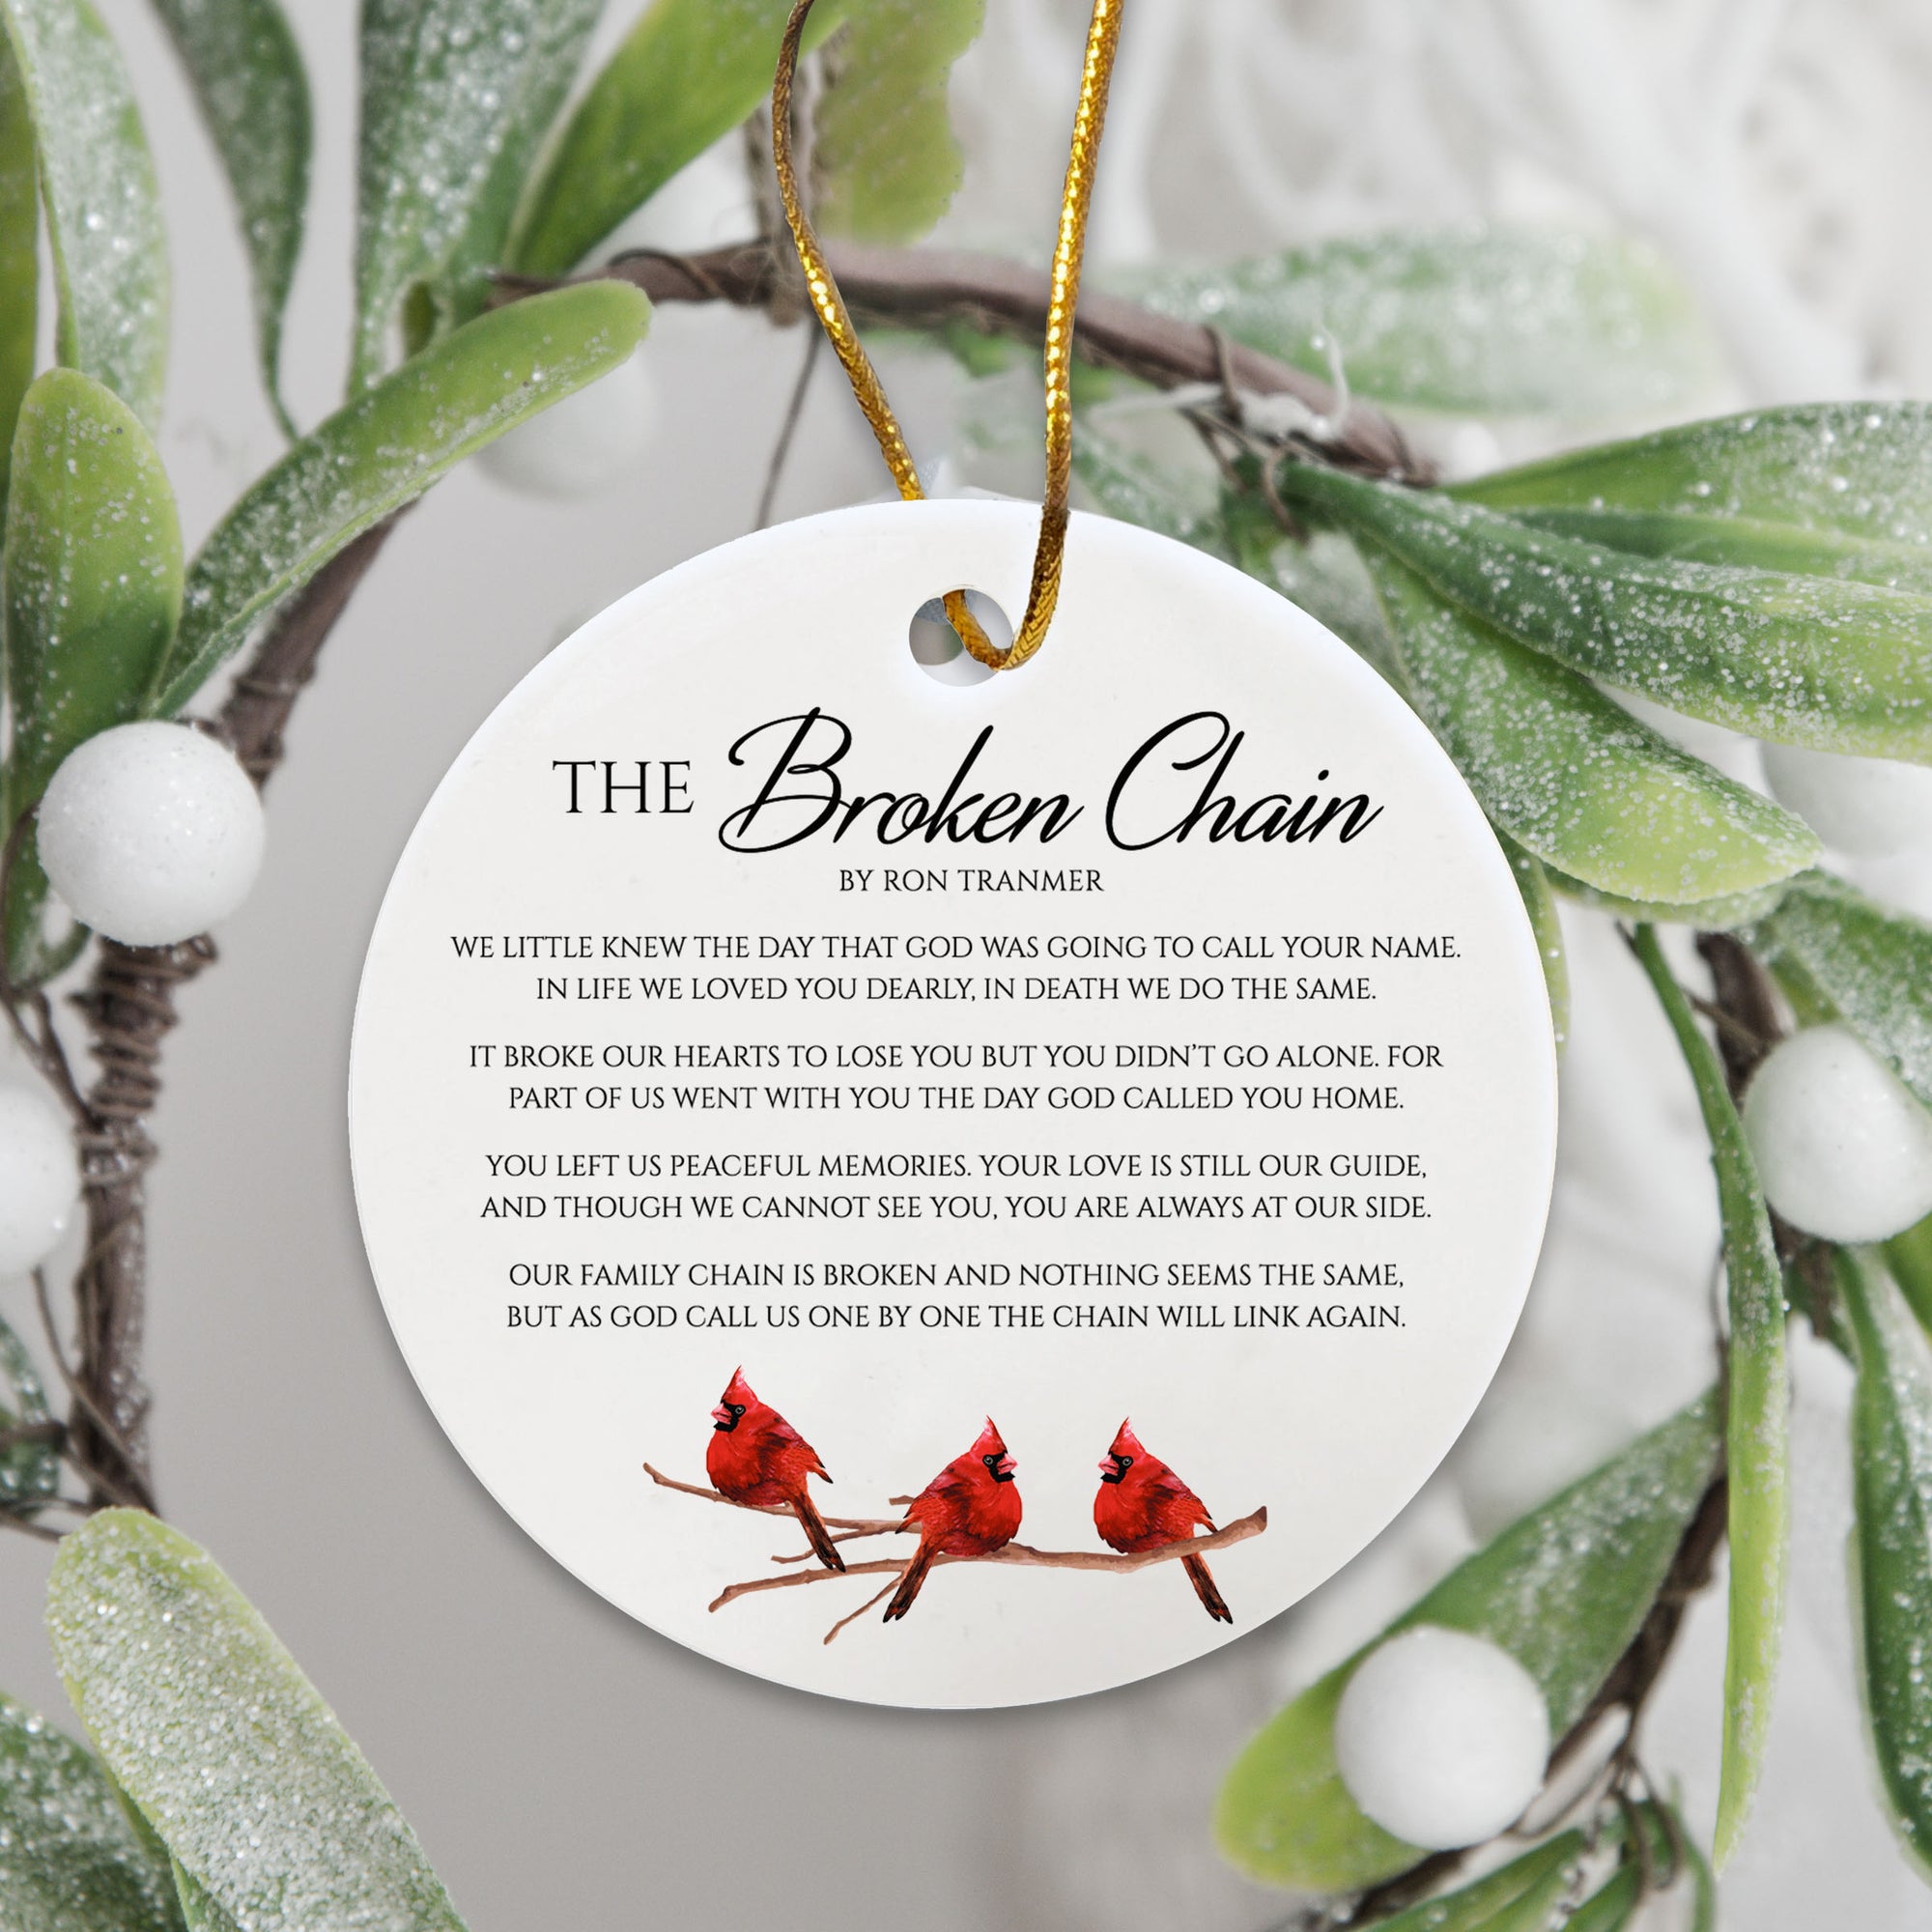 White Ceramic Cardinal Ornament With Everyday Verses Gift Ideas - The Broken Chain